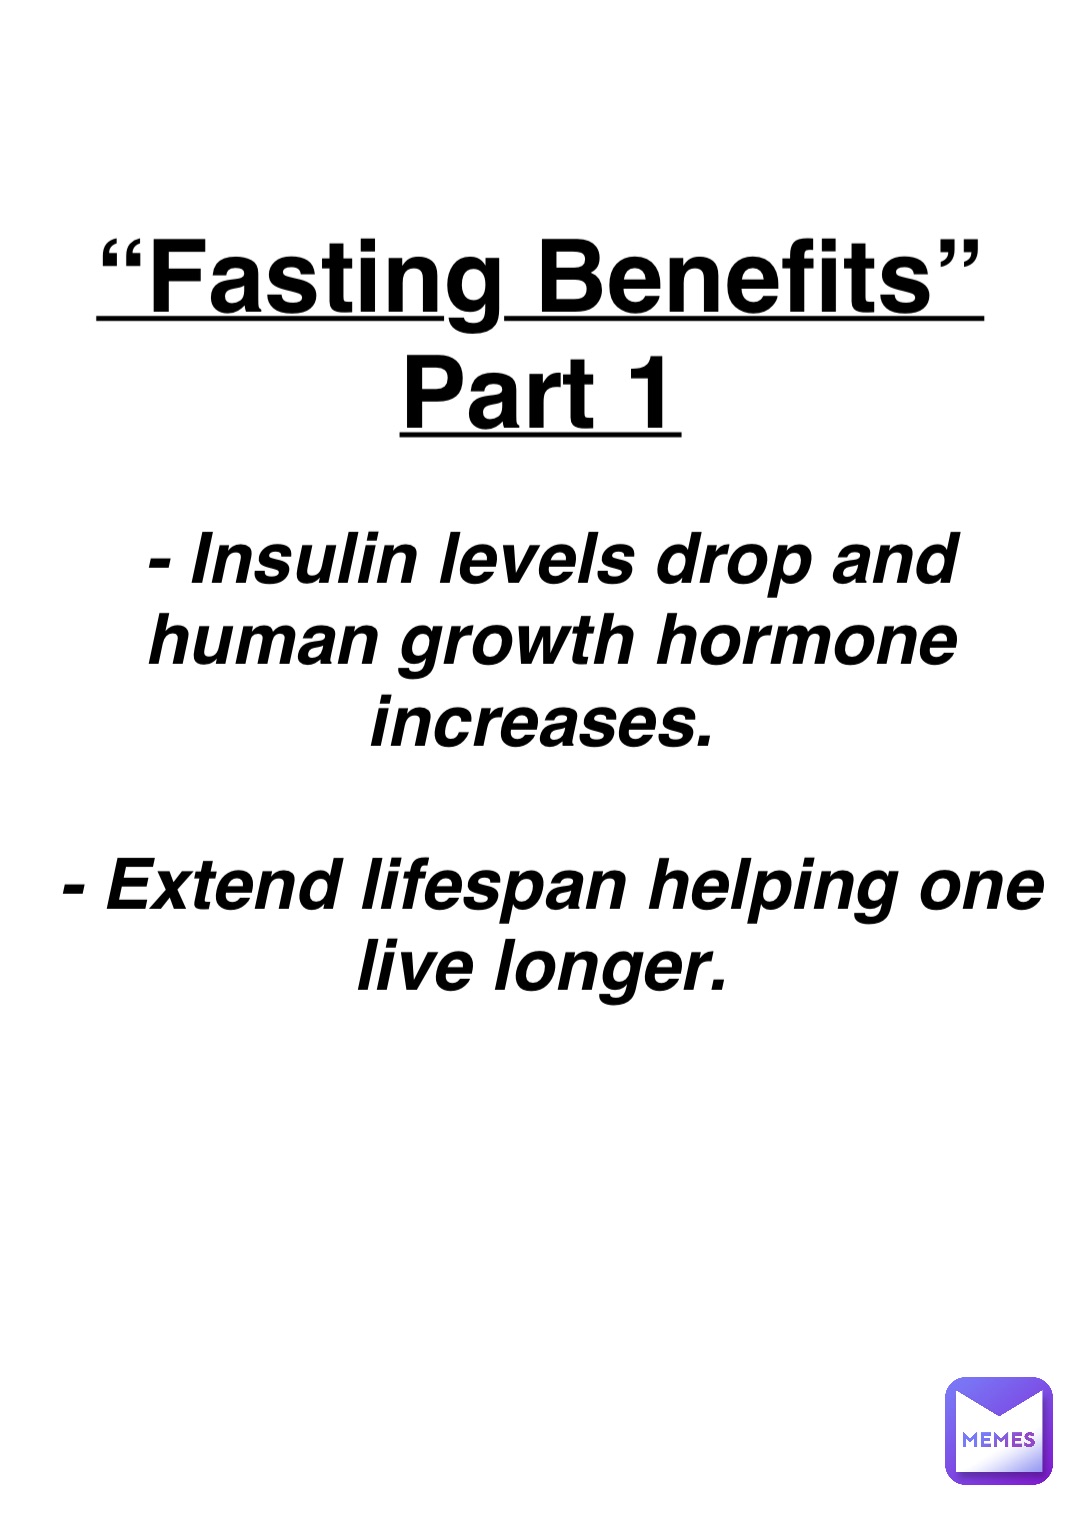 Double tap to edit “Fasting Benefits”
Part 1 - Insulin levels drop and human growth hormone increases.

- Extend lifespan helping one live longer.